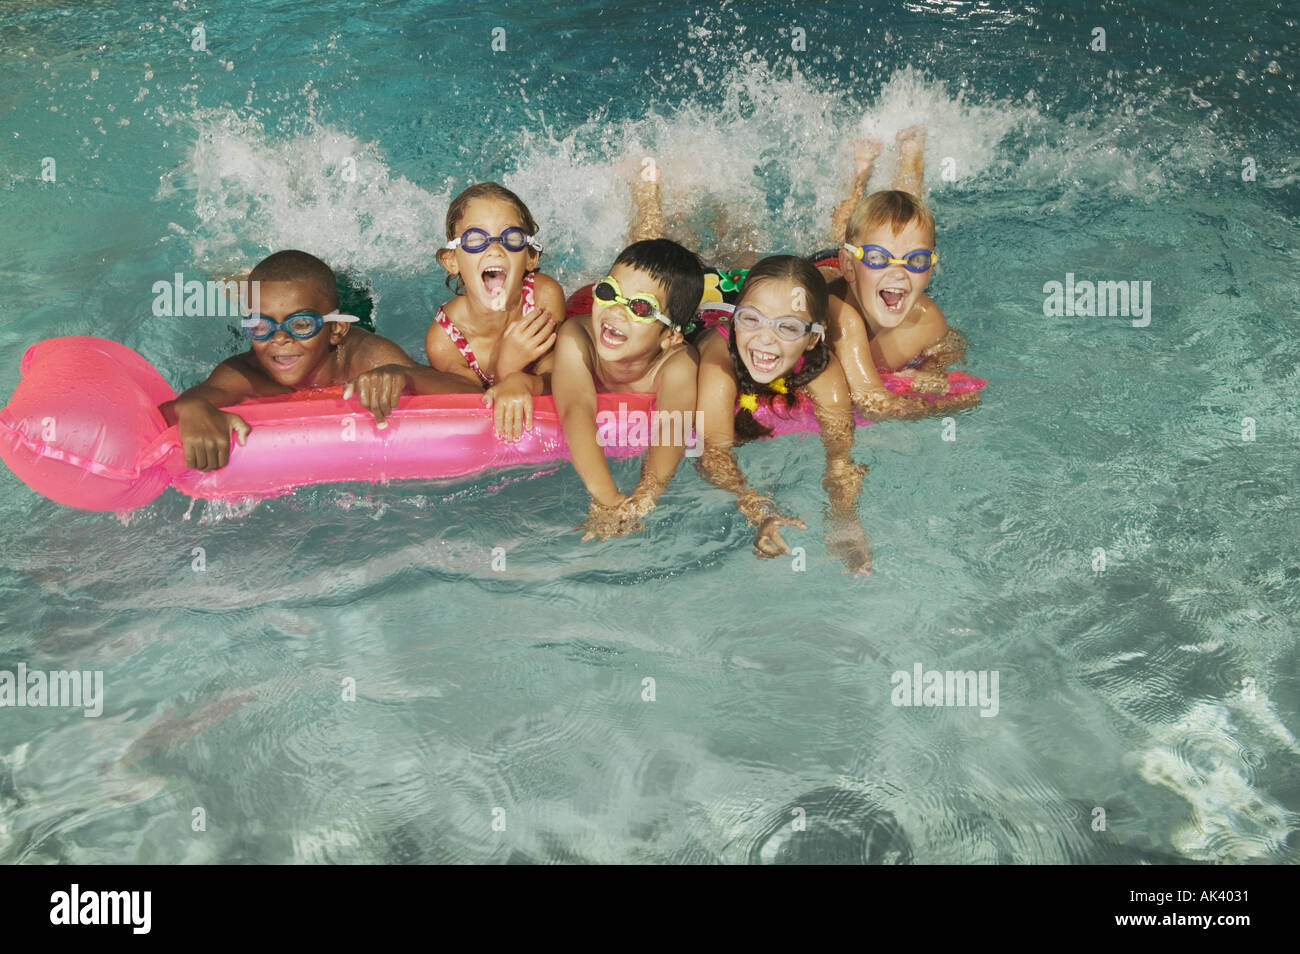 Group of kids in goggles on a pink float in a pool Stock Photo